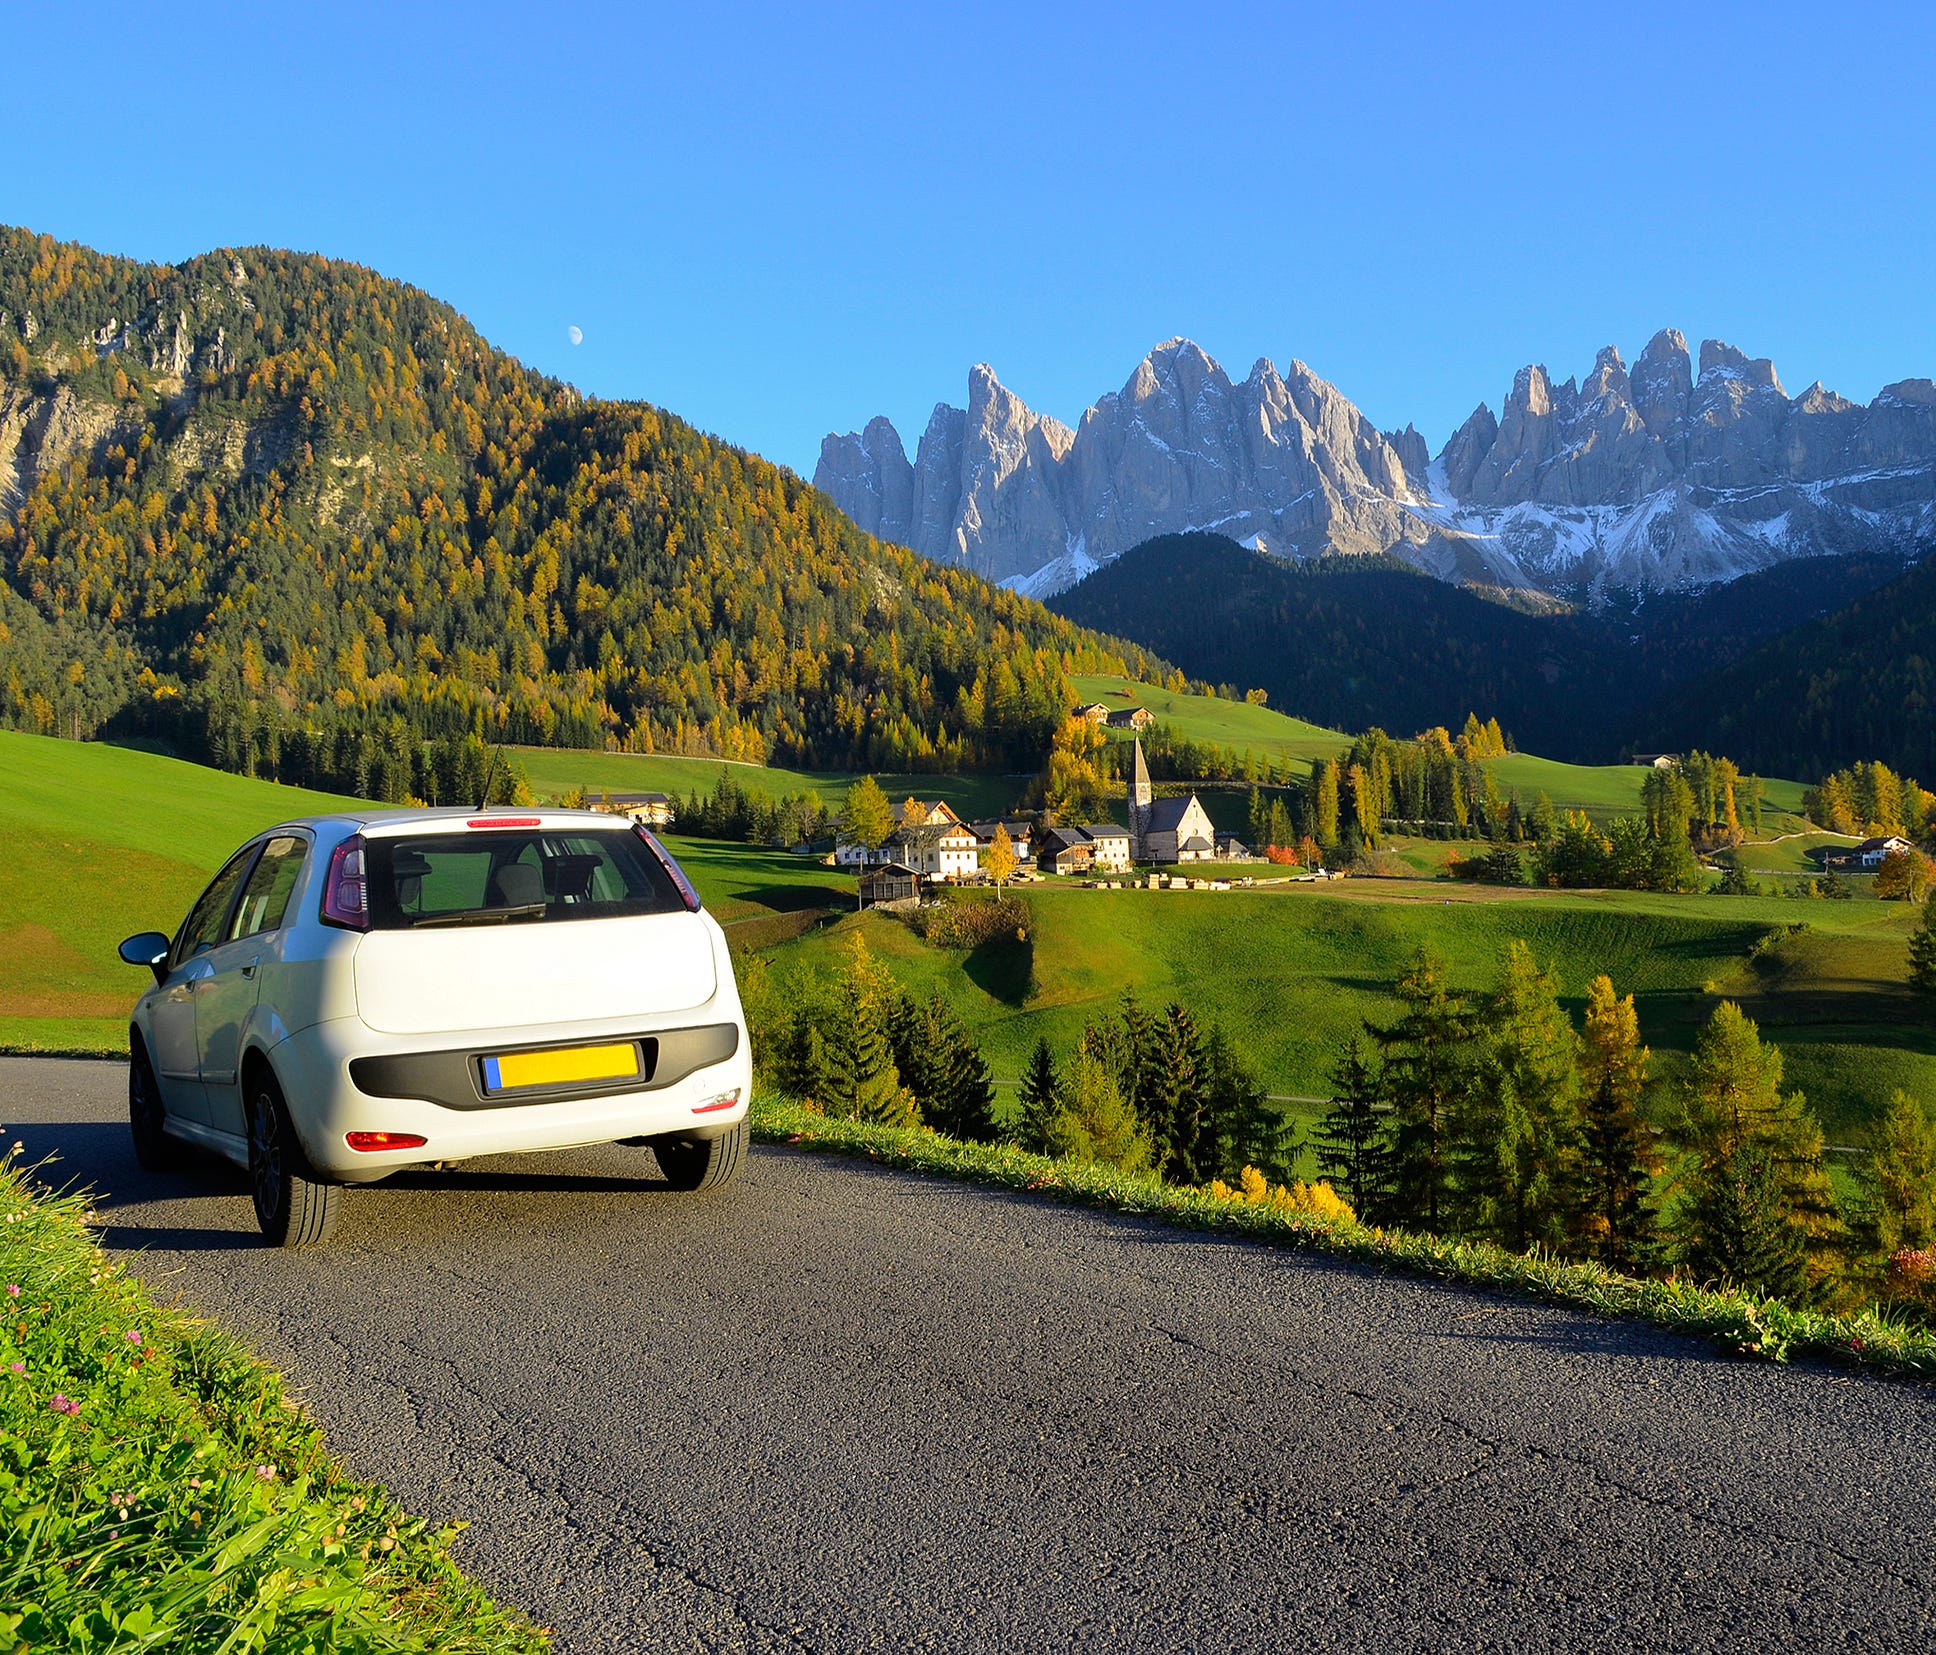 Some car rental companies operating in the EU have agreed to take voluntary steps toward improving price transparency, insurance disclosure and fuel options.